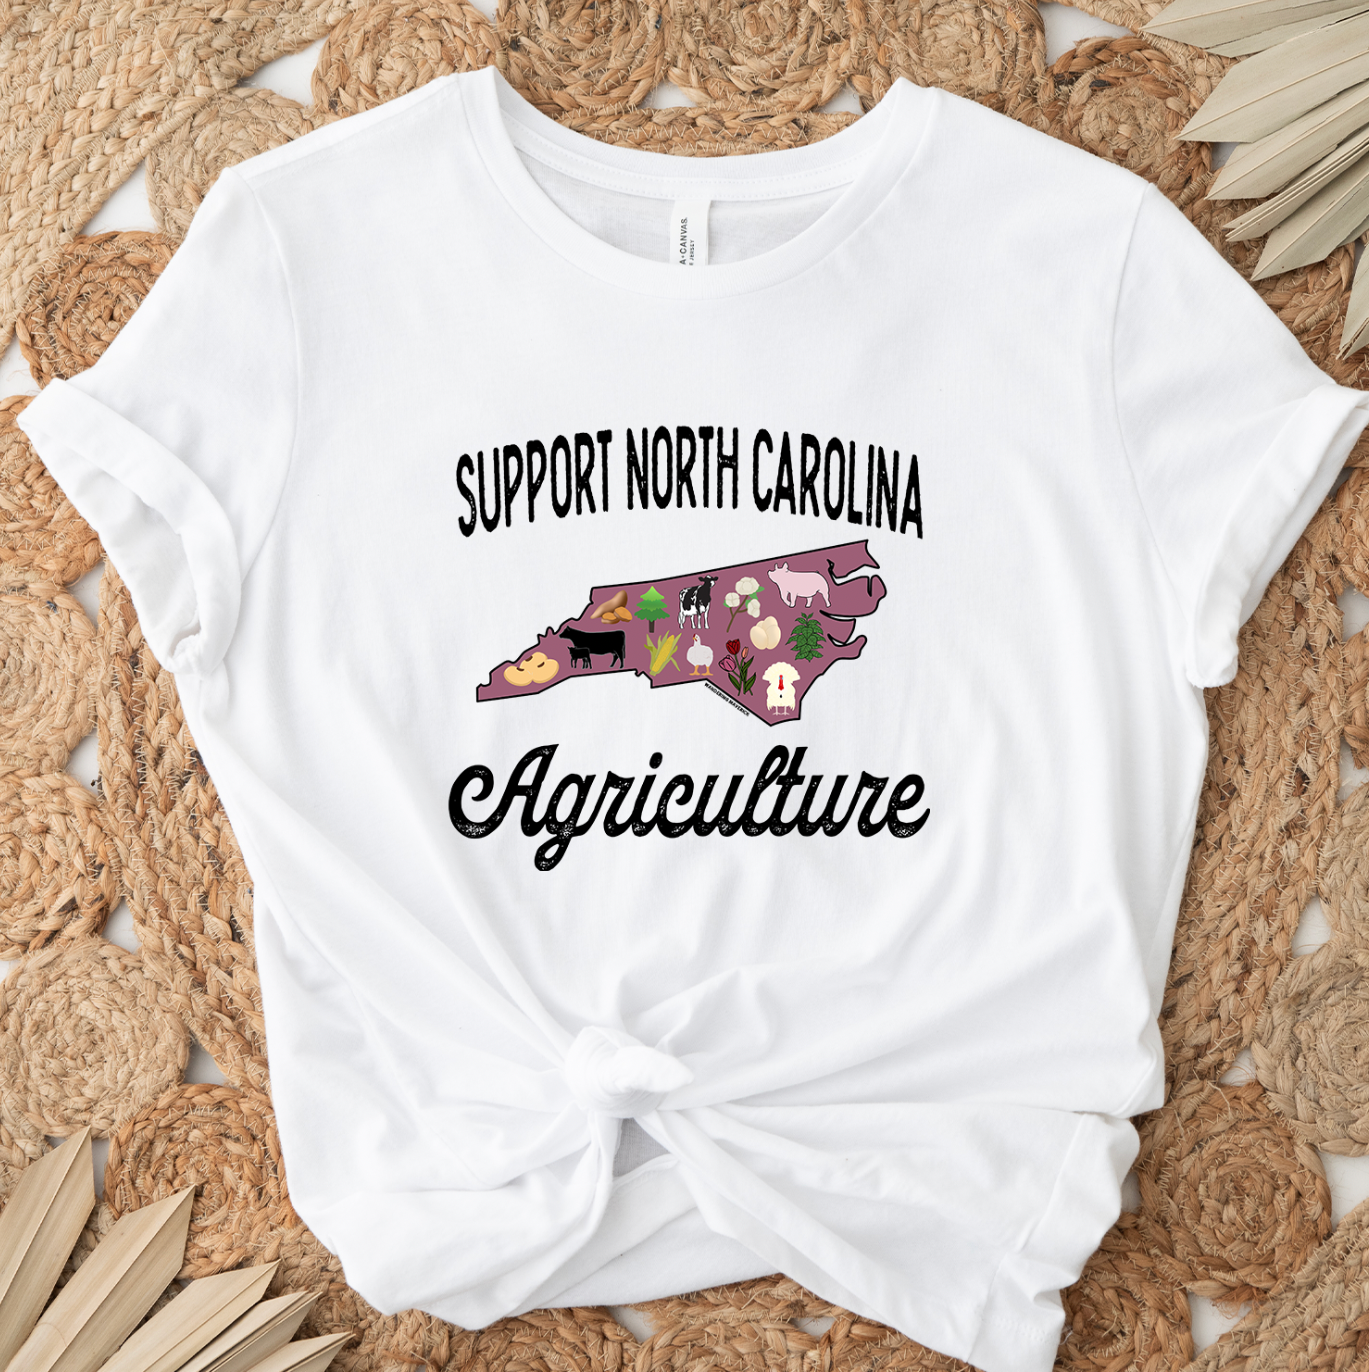 Support North Carolina Agriculture T-Shirt (XS-4XL) - Multiple Colors!